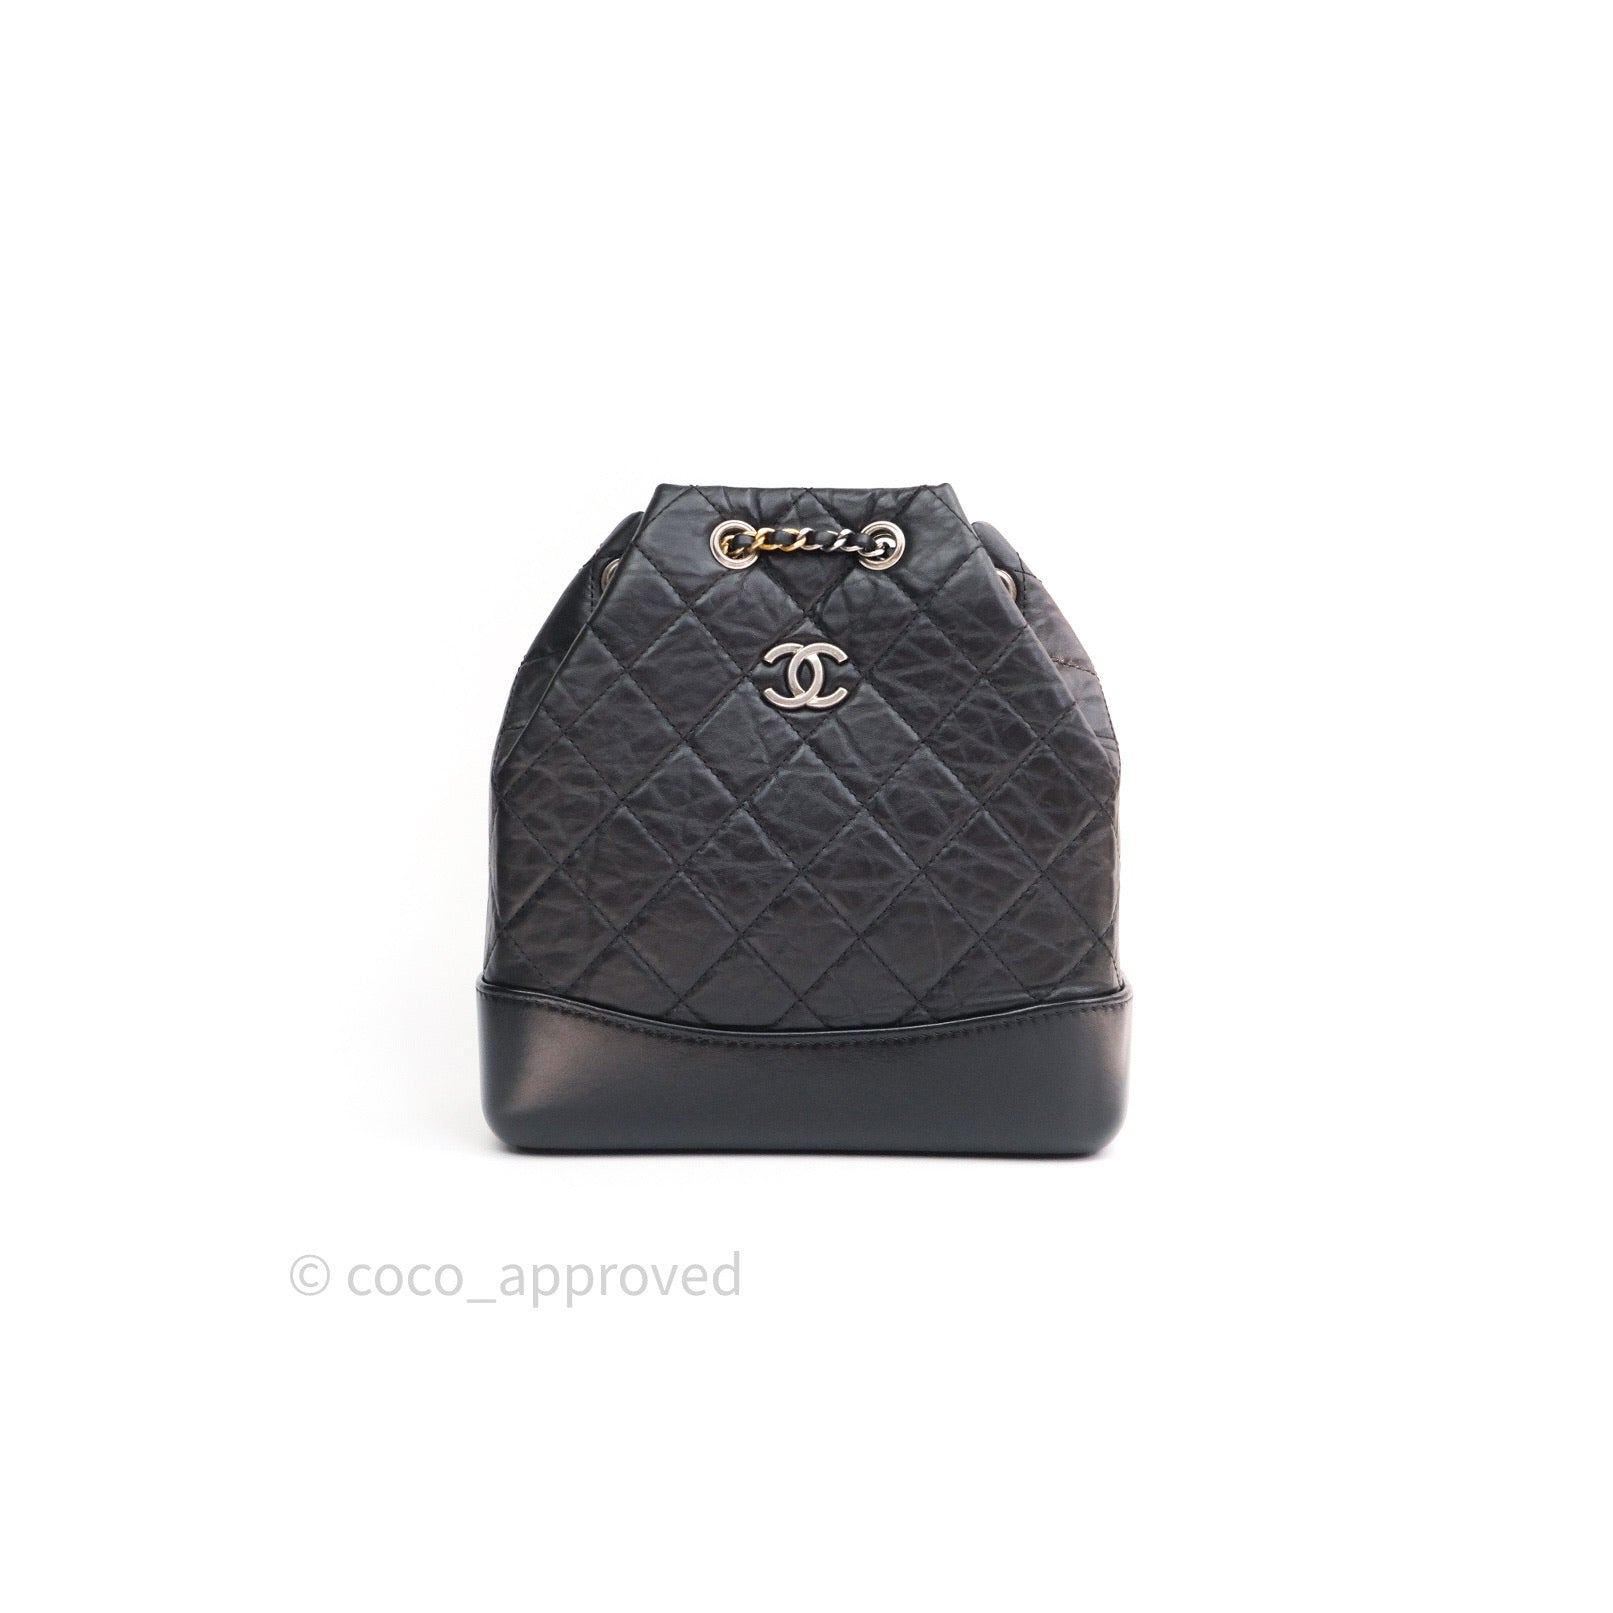 Chanel Gabrielle Backpack Black Aged Calfskin Small Black – Coco